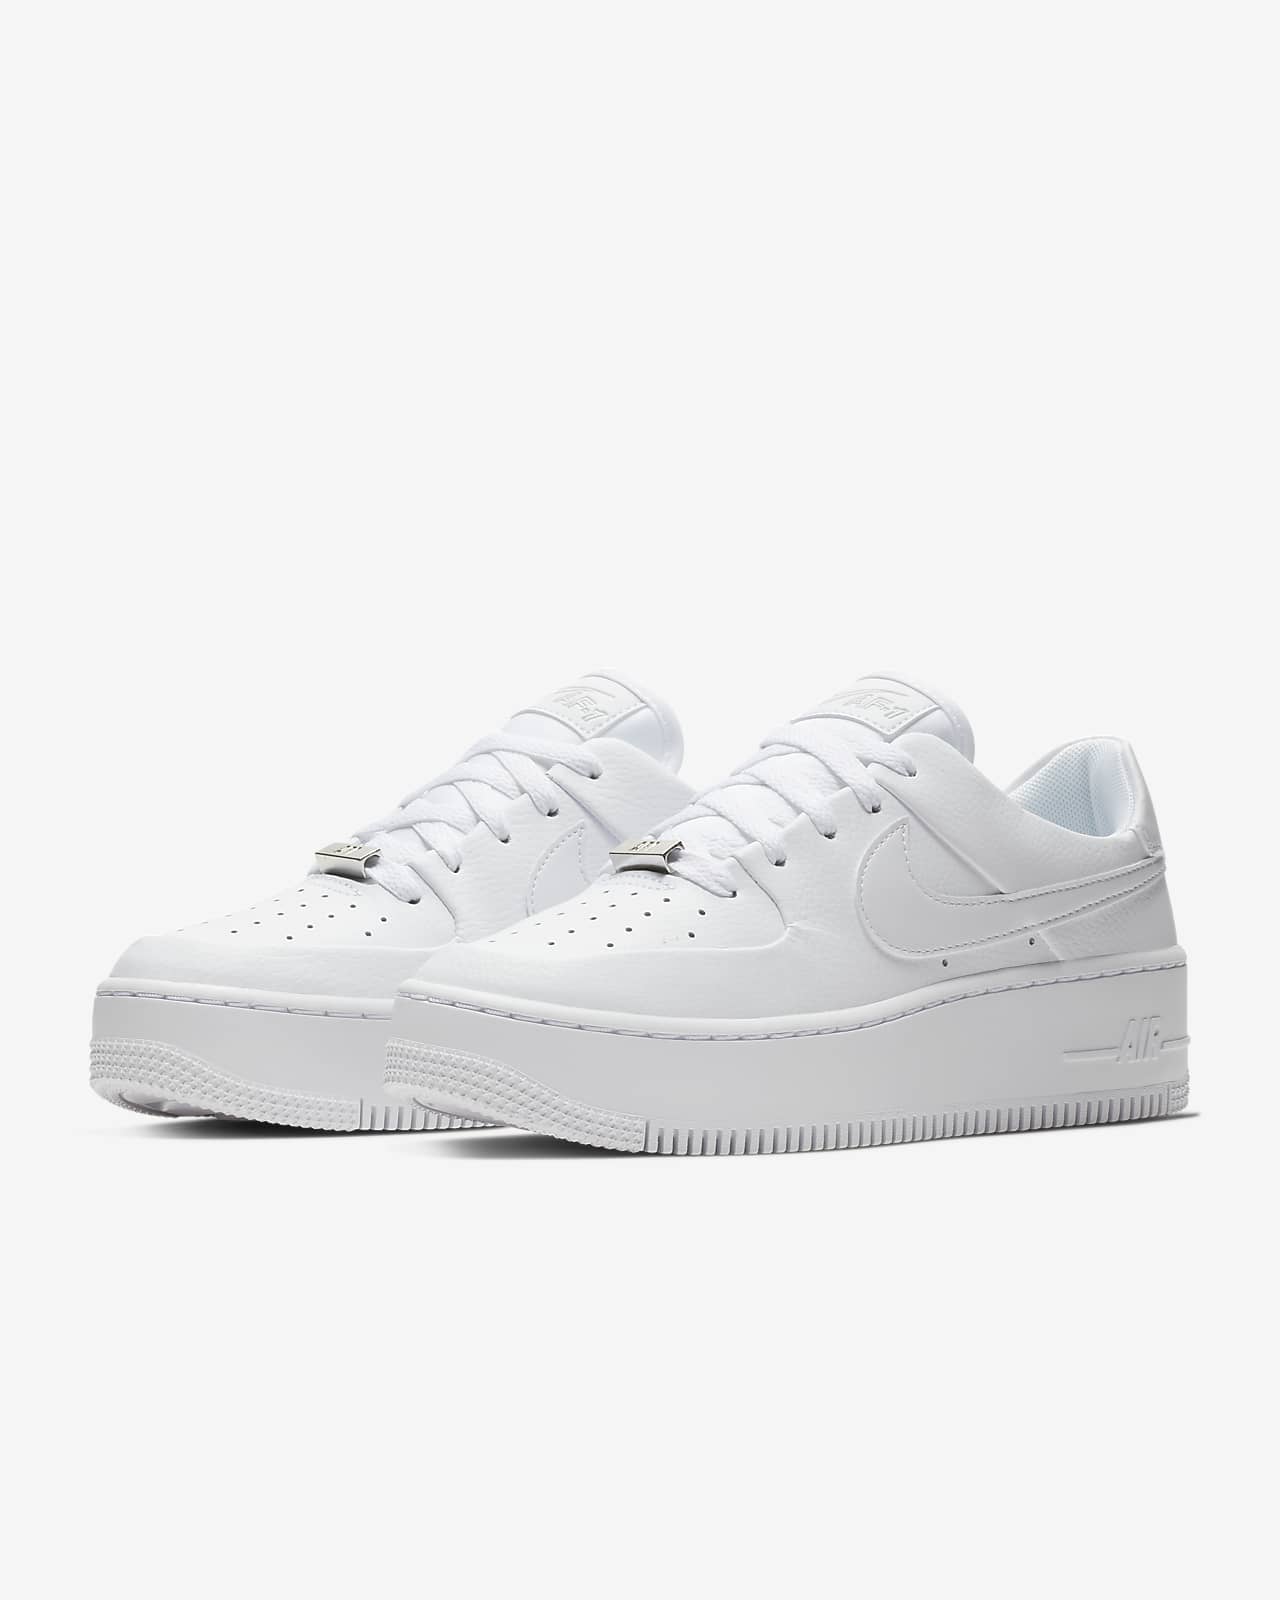 air force 1 low white size 7.5